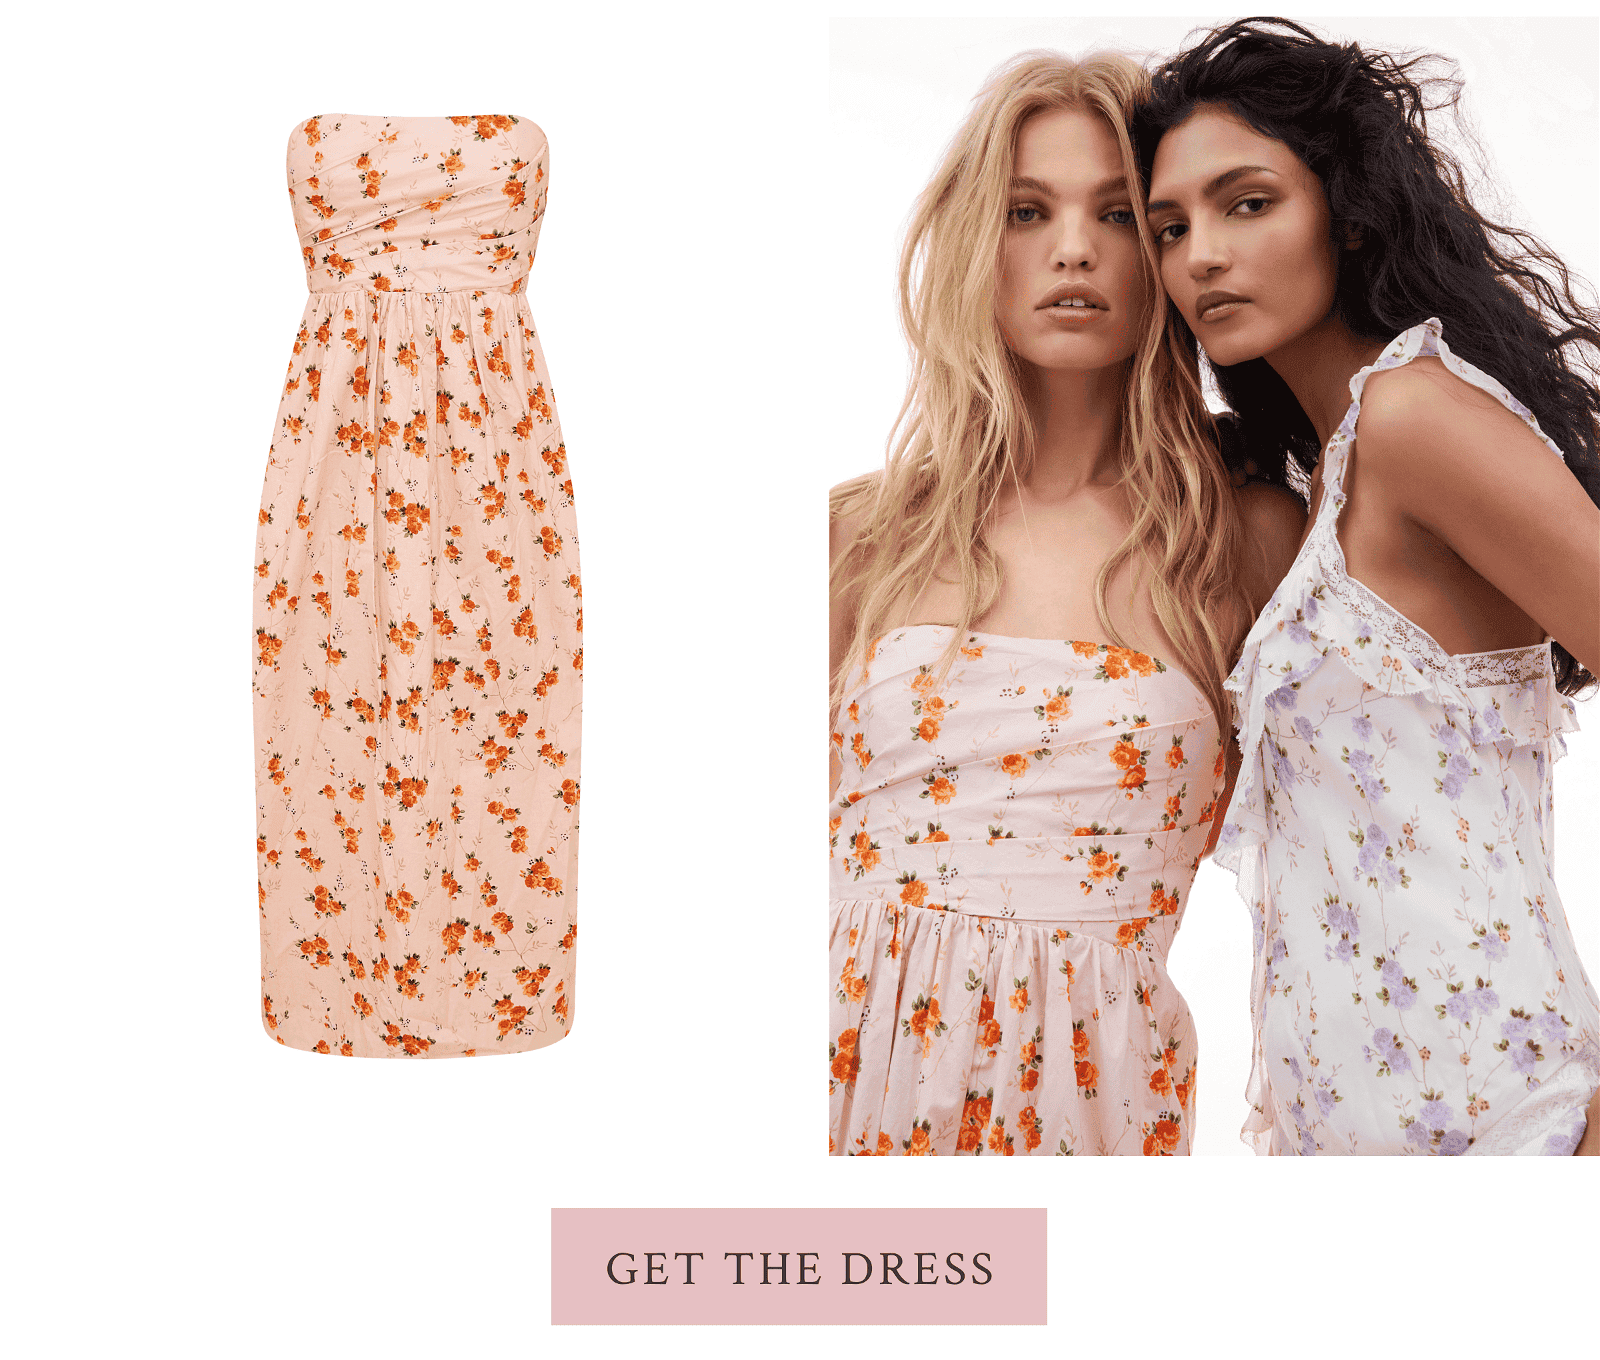 The Luxie - Bright blooms on a super flattering tulip silhouette make this a love-forever dress.